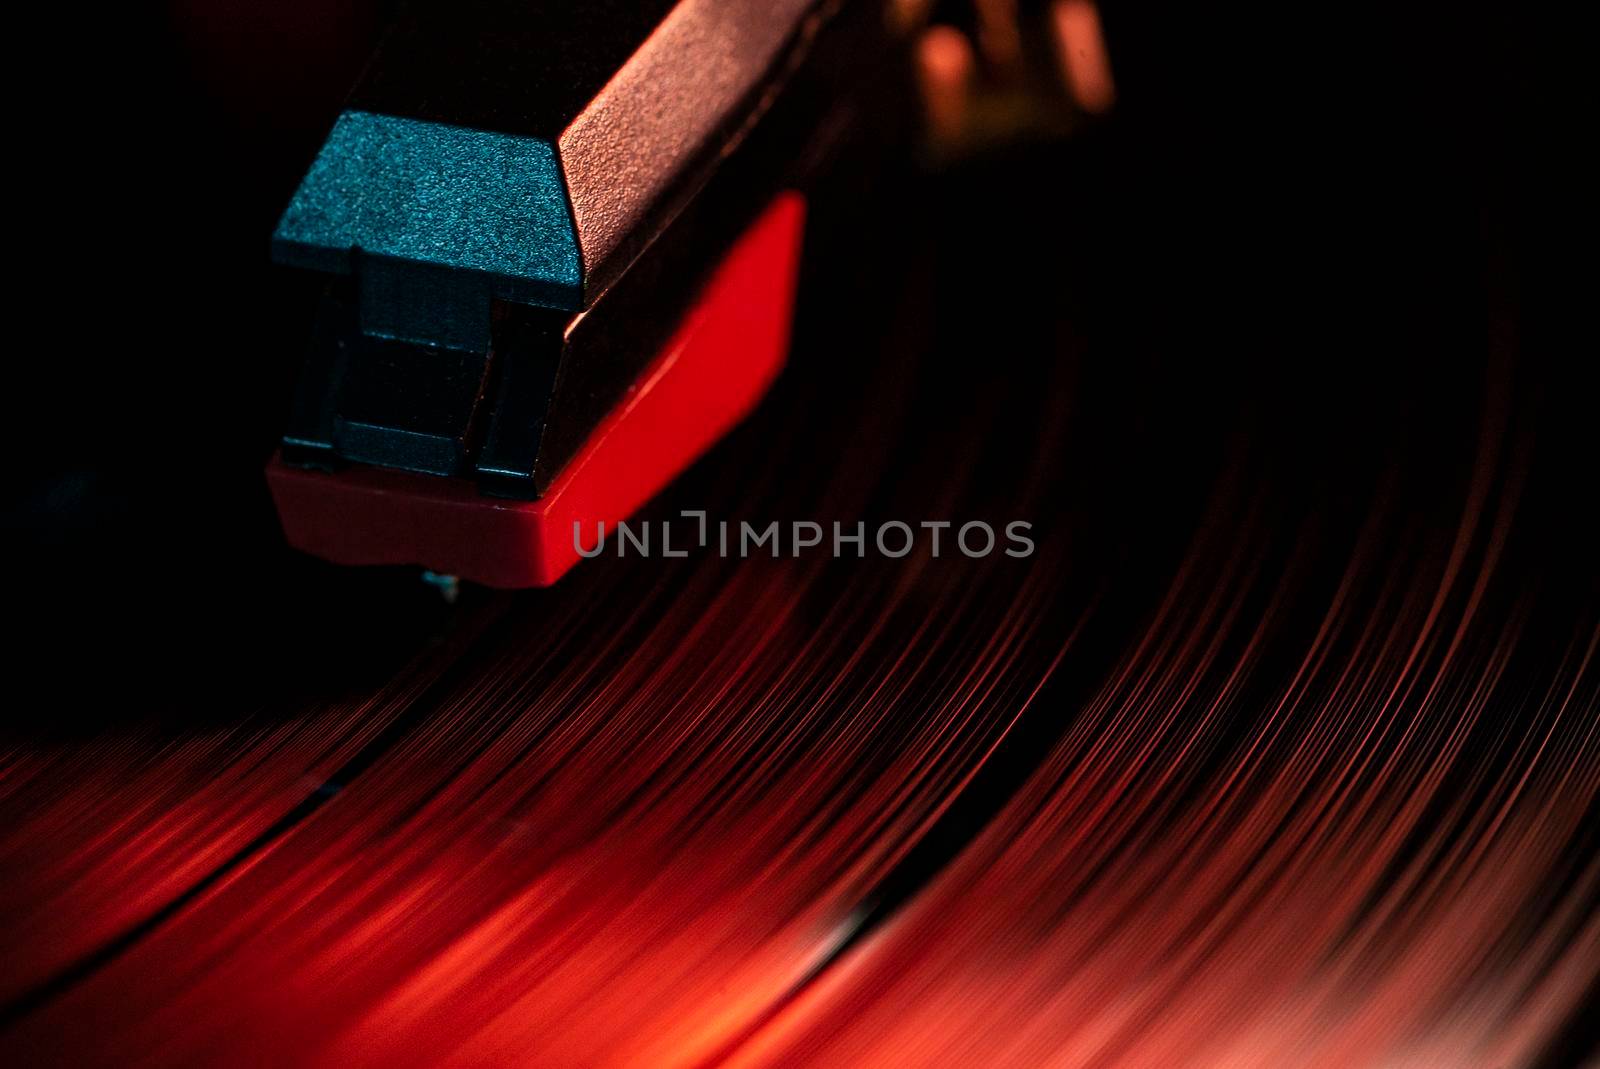 Macro Detail of needle on vinyl record 3 by pippocarlot